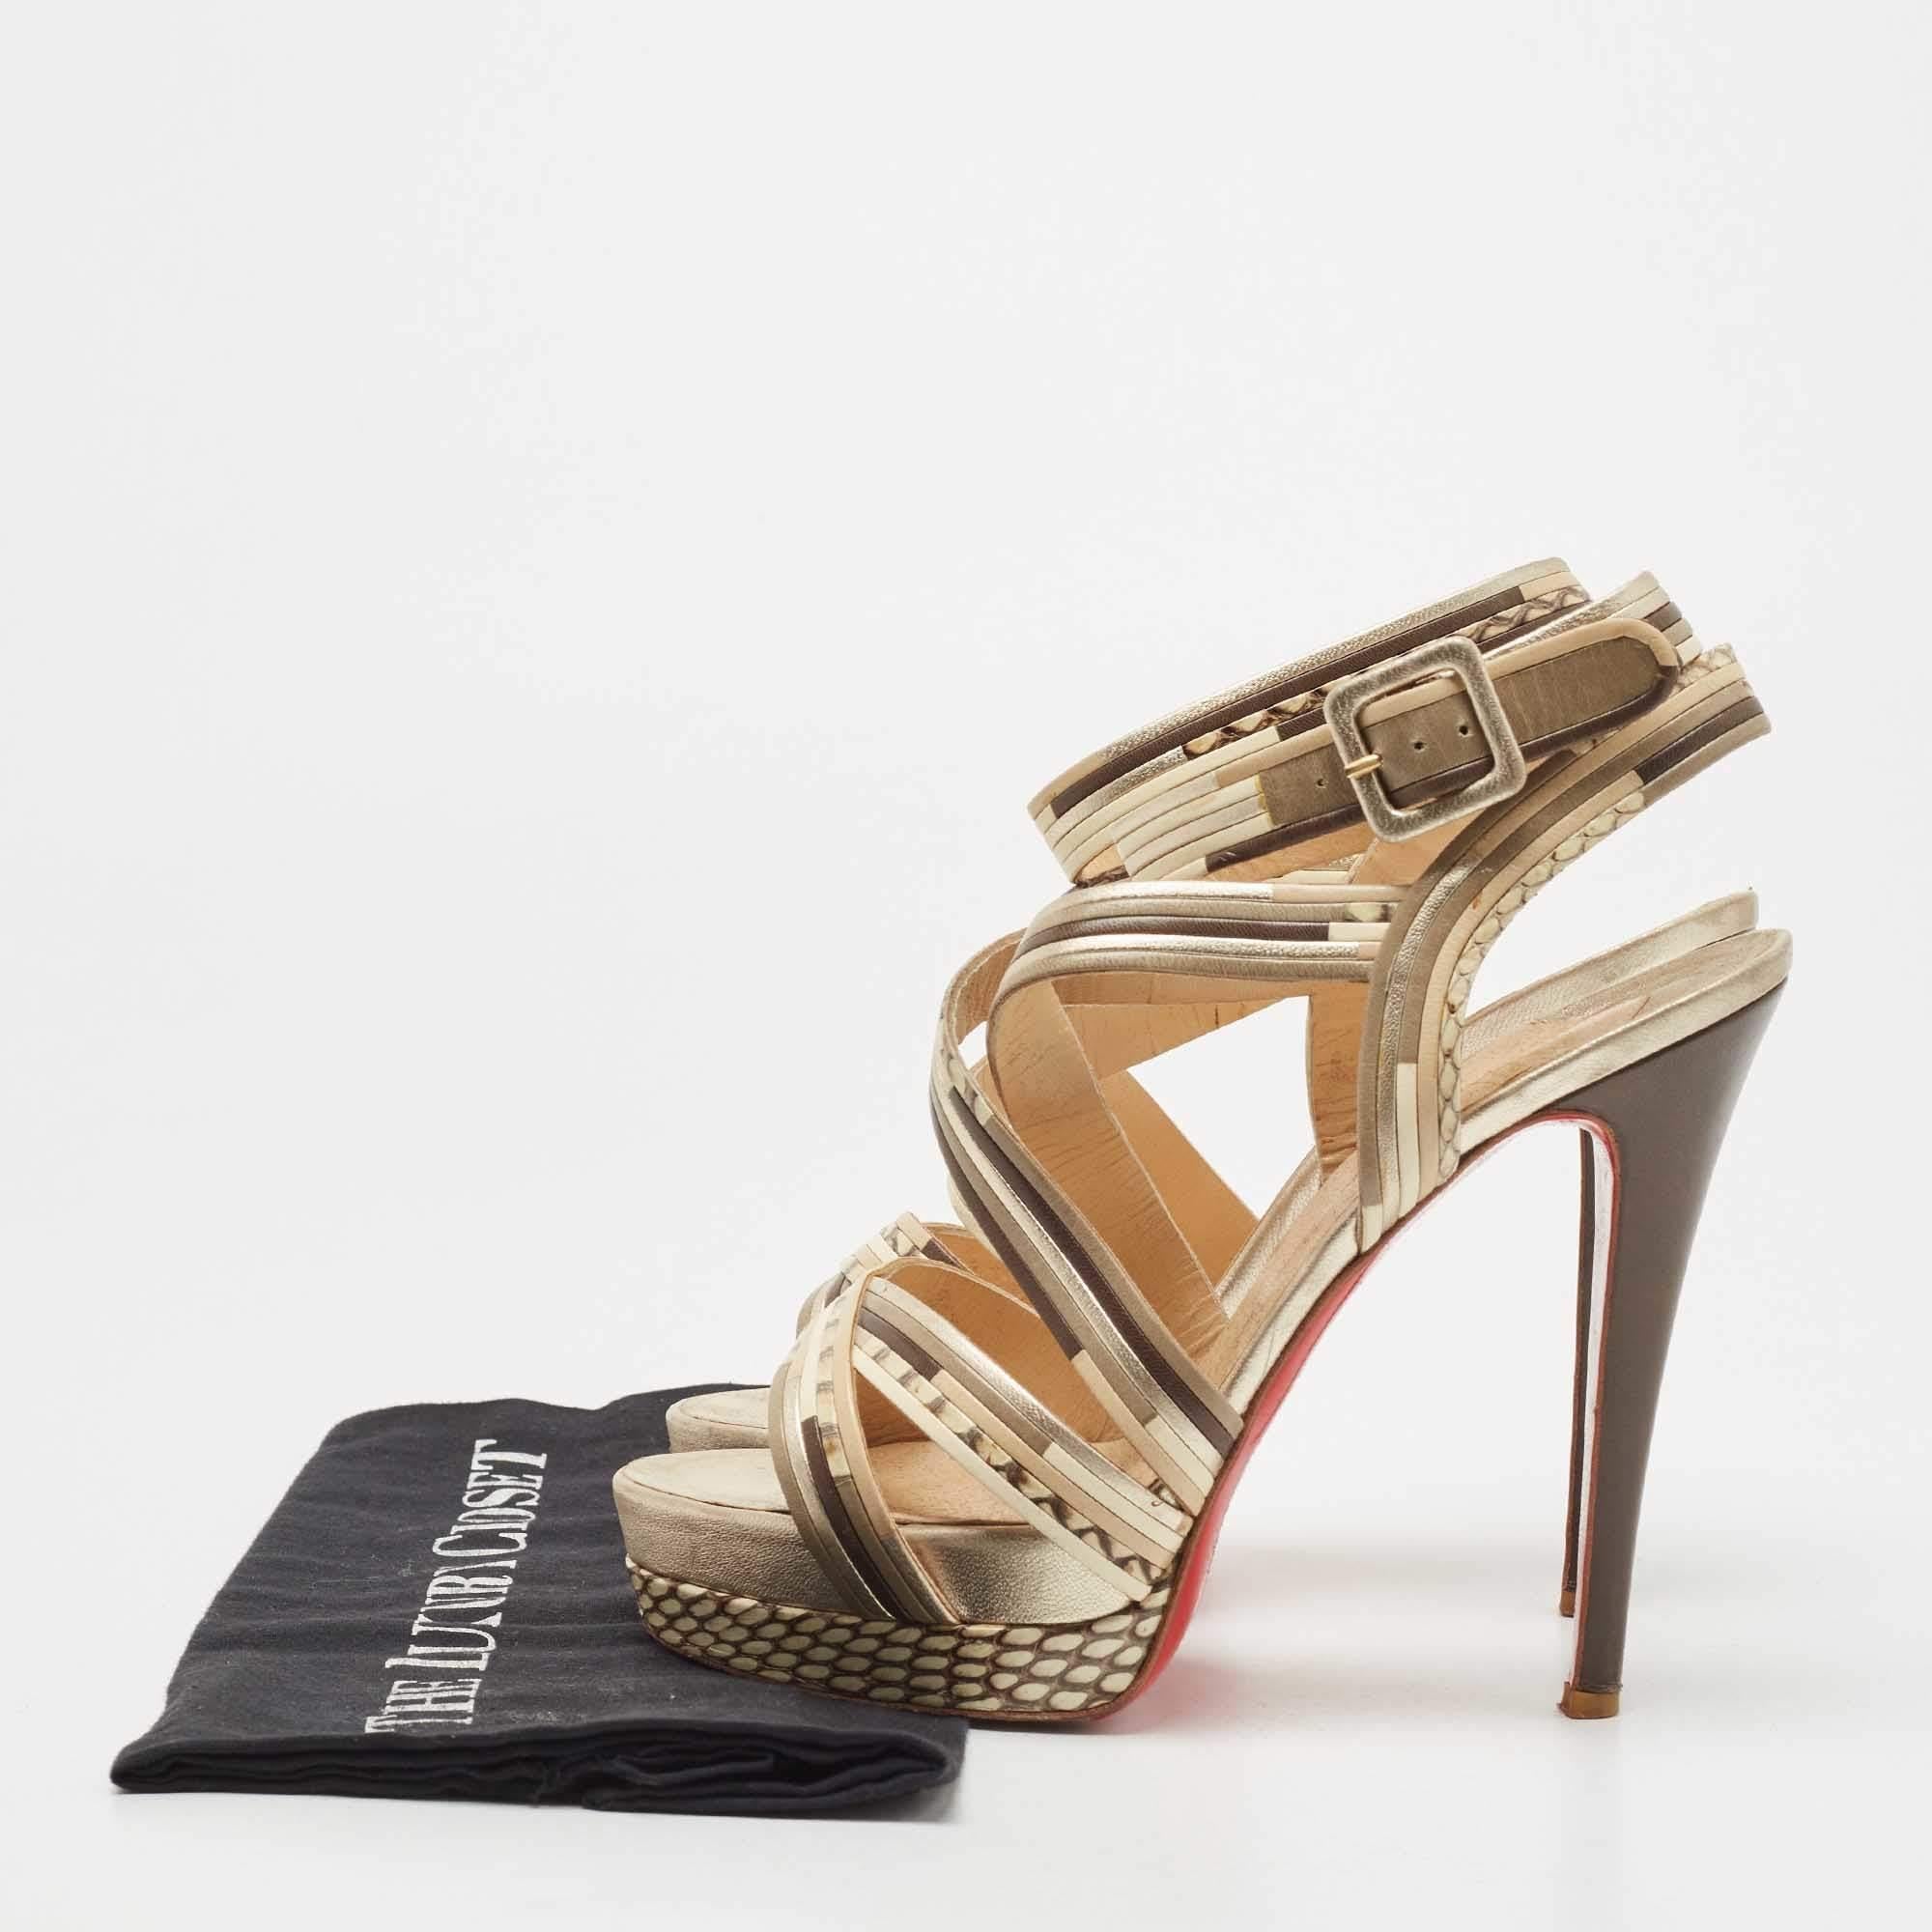 Christian Louboutin Brown/Beige Leather Strappy Platform Sandals Size 38.5 5